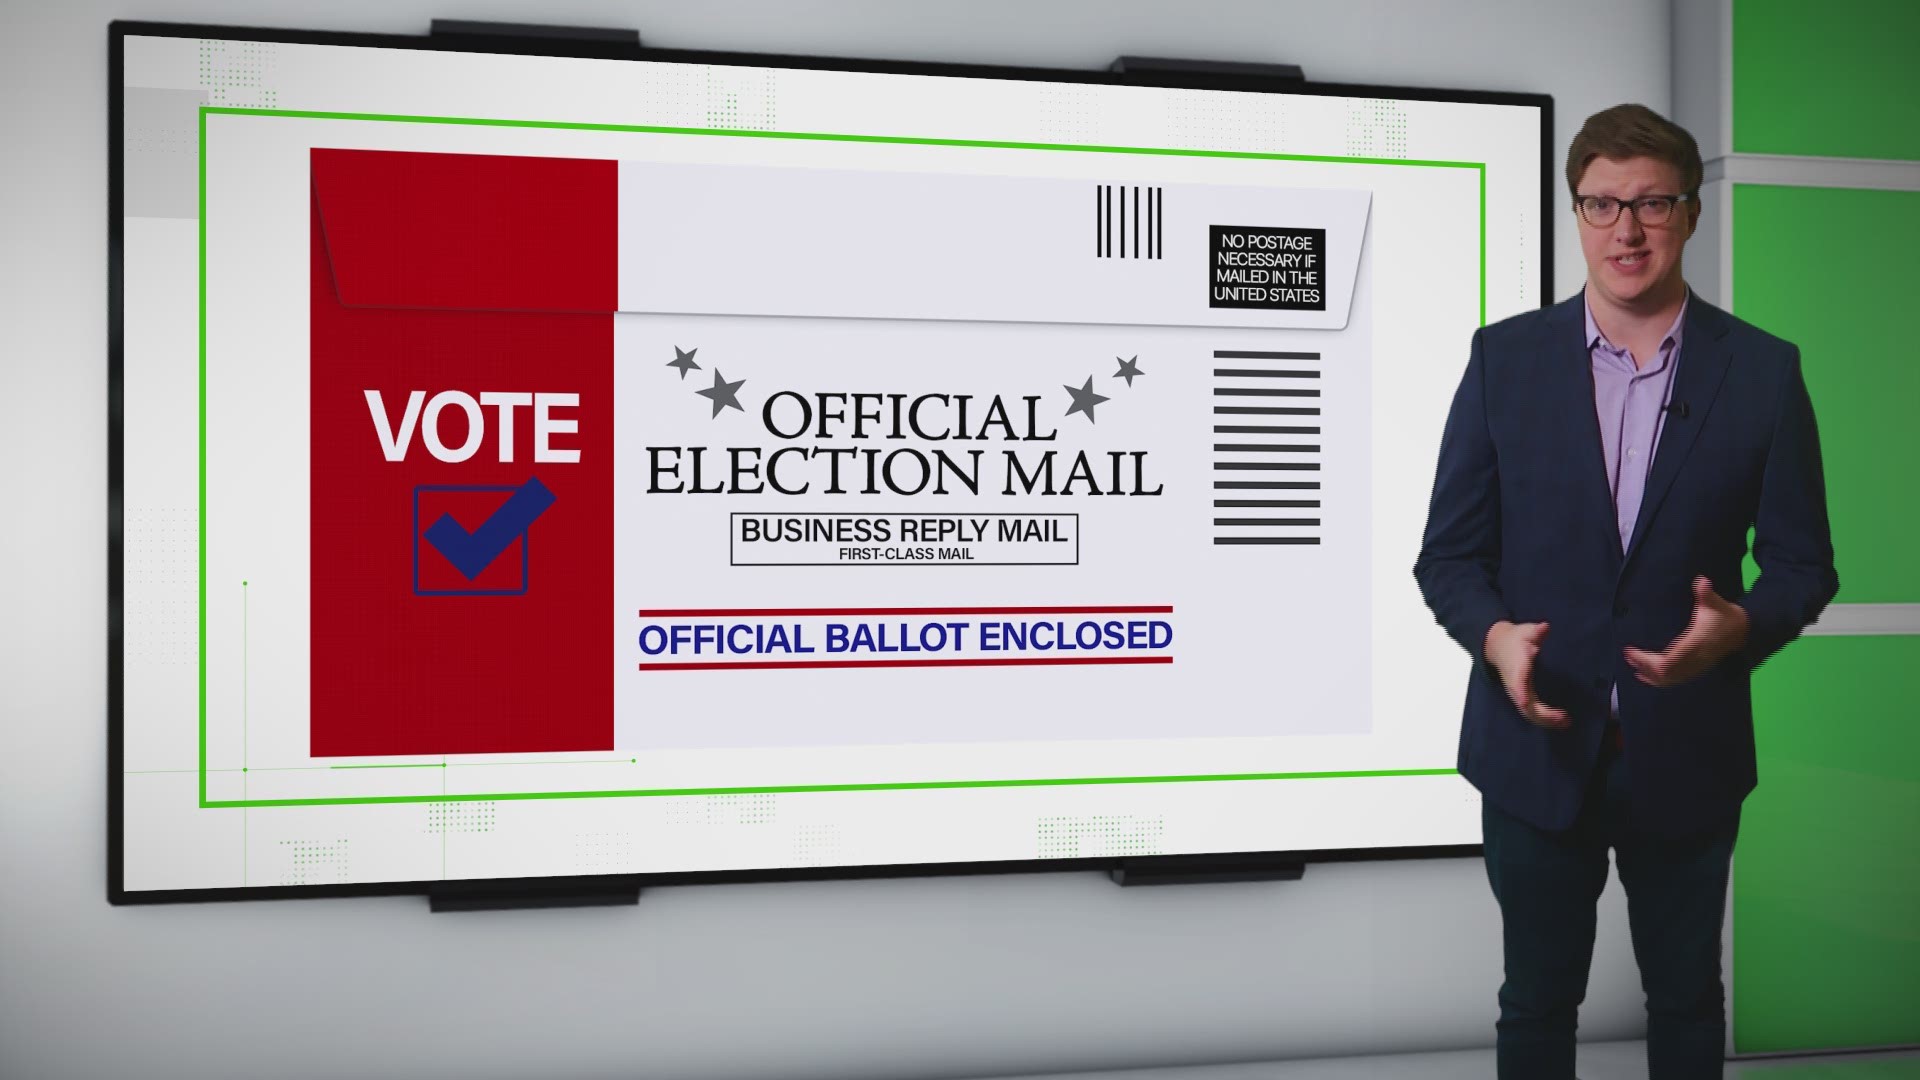 The Postal Service will not return a completed mail-in ballot for a federal election. However, you should still apply the appropriate postage anyway.